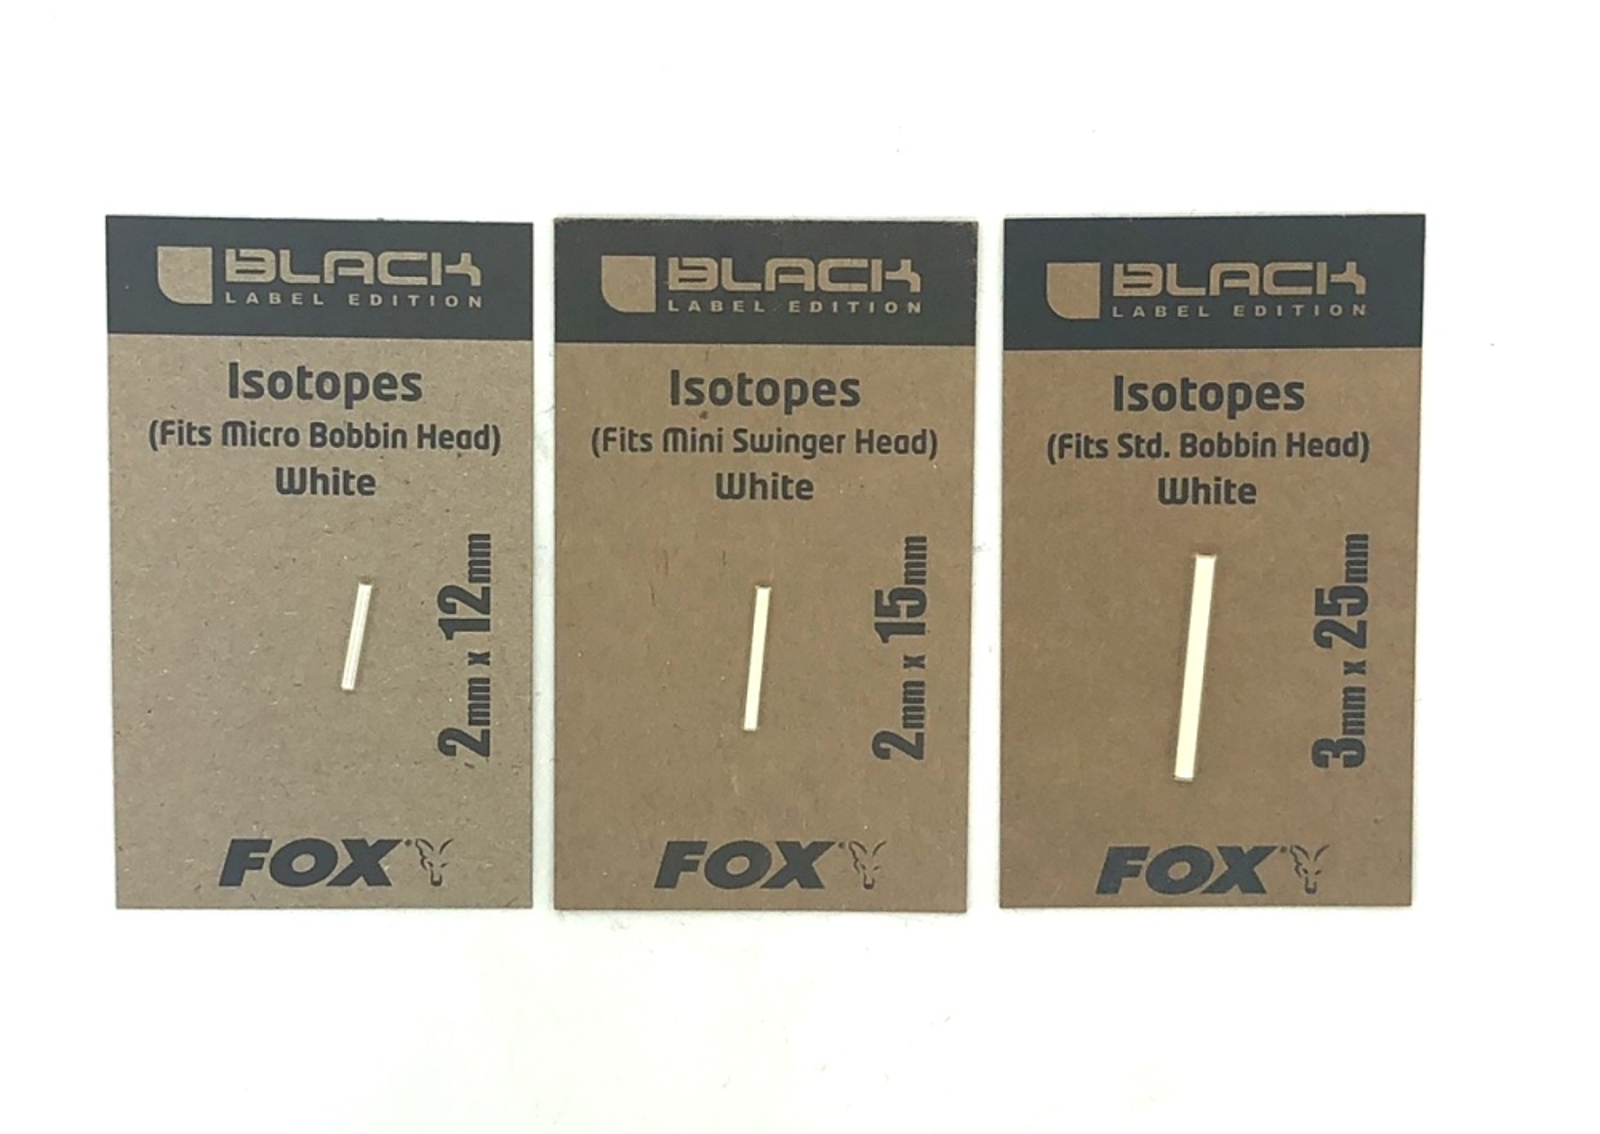 Fox Black Label Isotopes White 2mm x 15mm